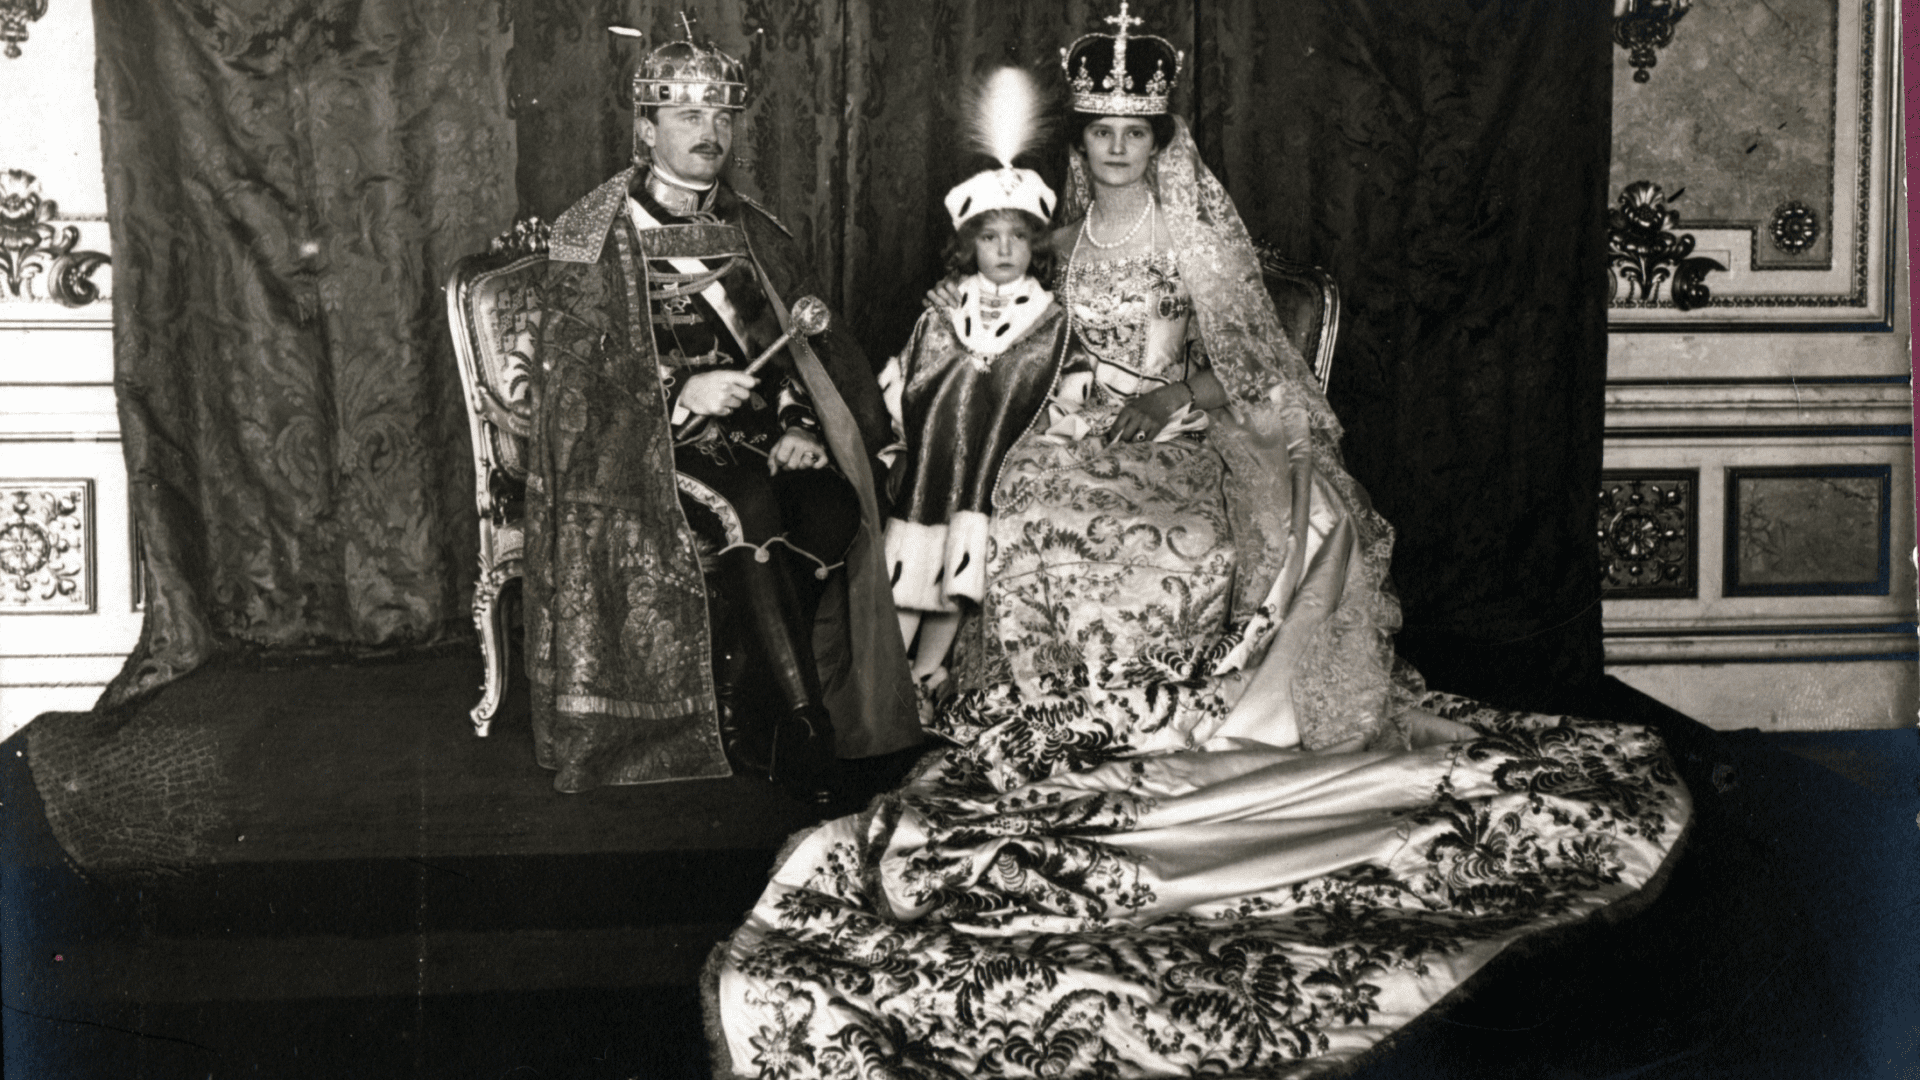 King Charles IV of Hungary with Queen Consort Zita and Crown Prince Otto.